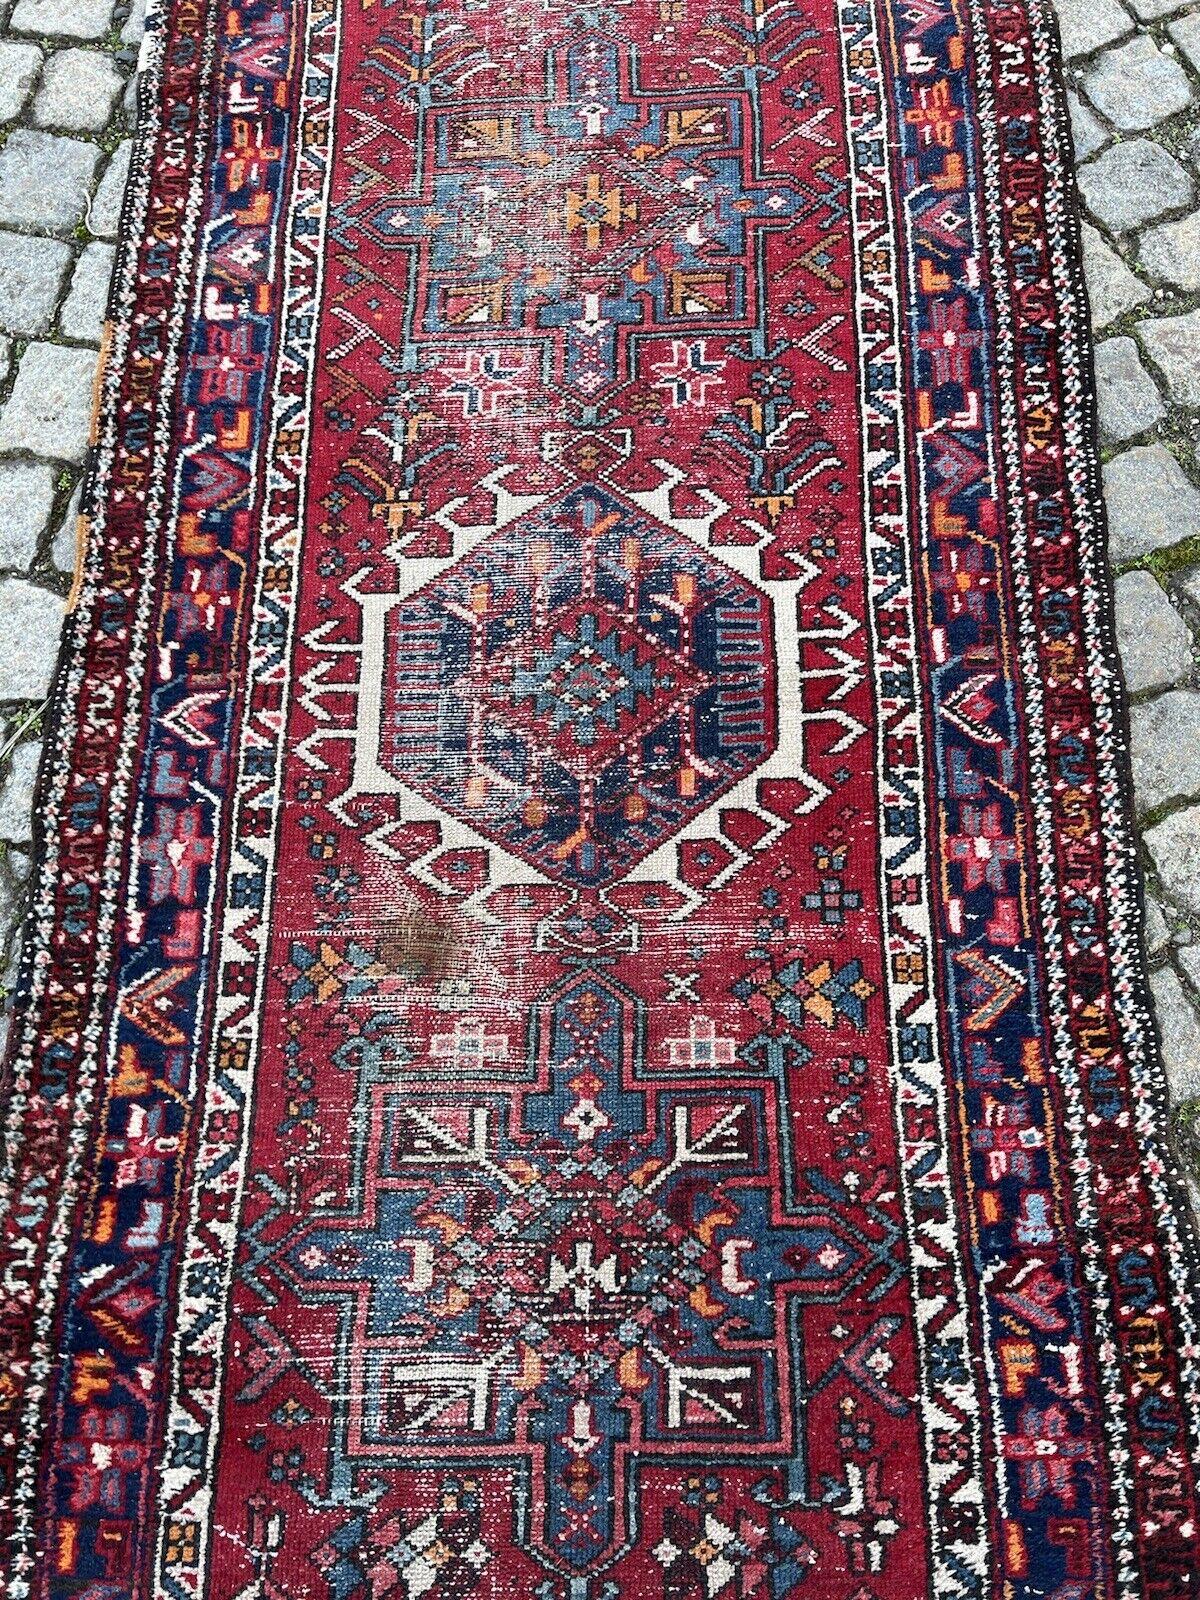 Handmade Antique Persian Style Karajeh Runner Rug 2.9' x 11.2', 1920s - 1S57 In Good Condition For Sale In Bordeaux, FR